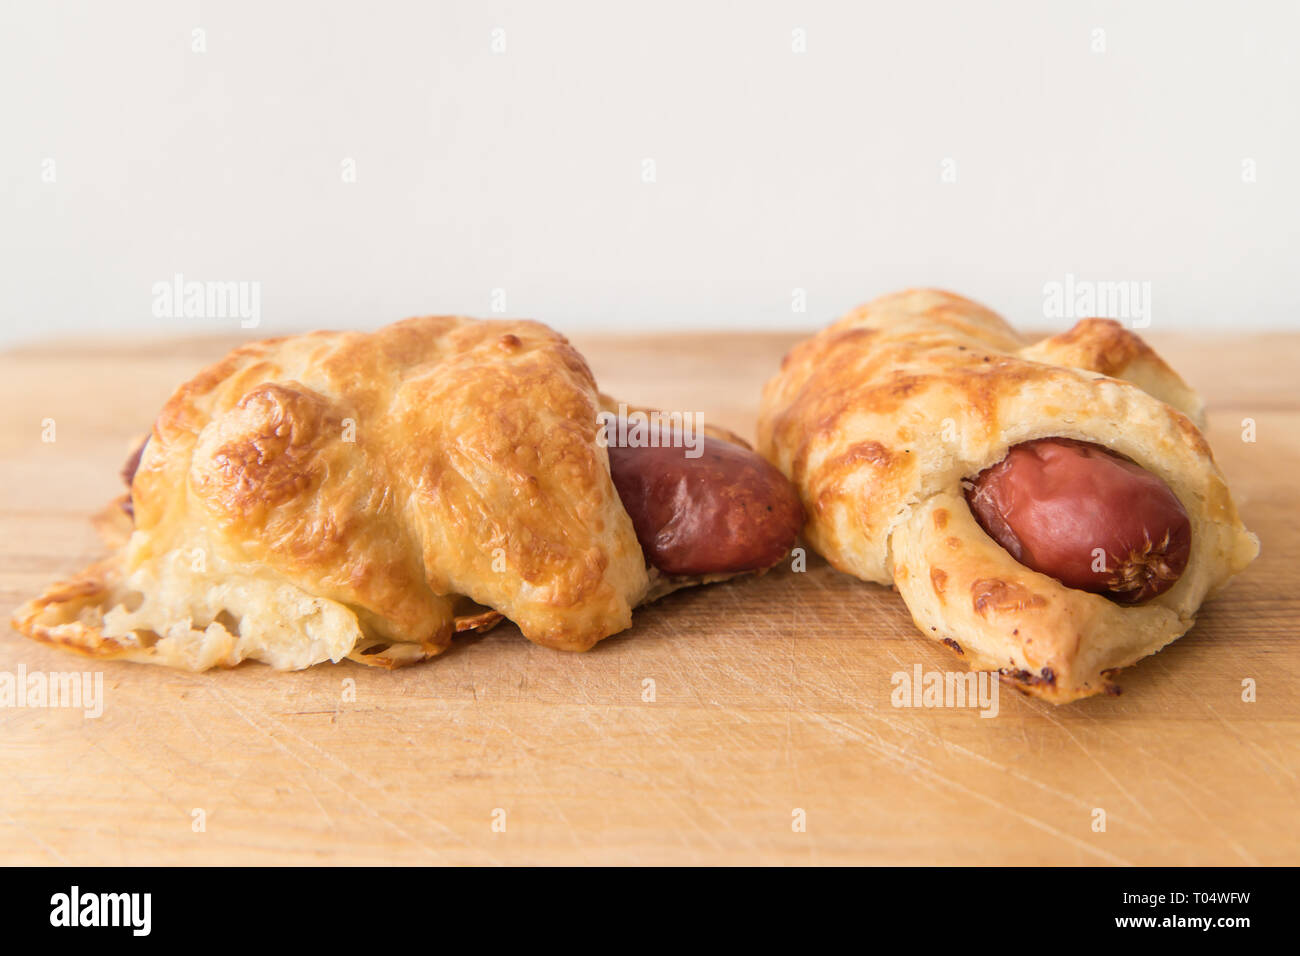 A savoury Czech or Slovak snack food croissant s párkem. A vienna or frankfurter sausage wrapped in pastry. Stock Photo